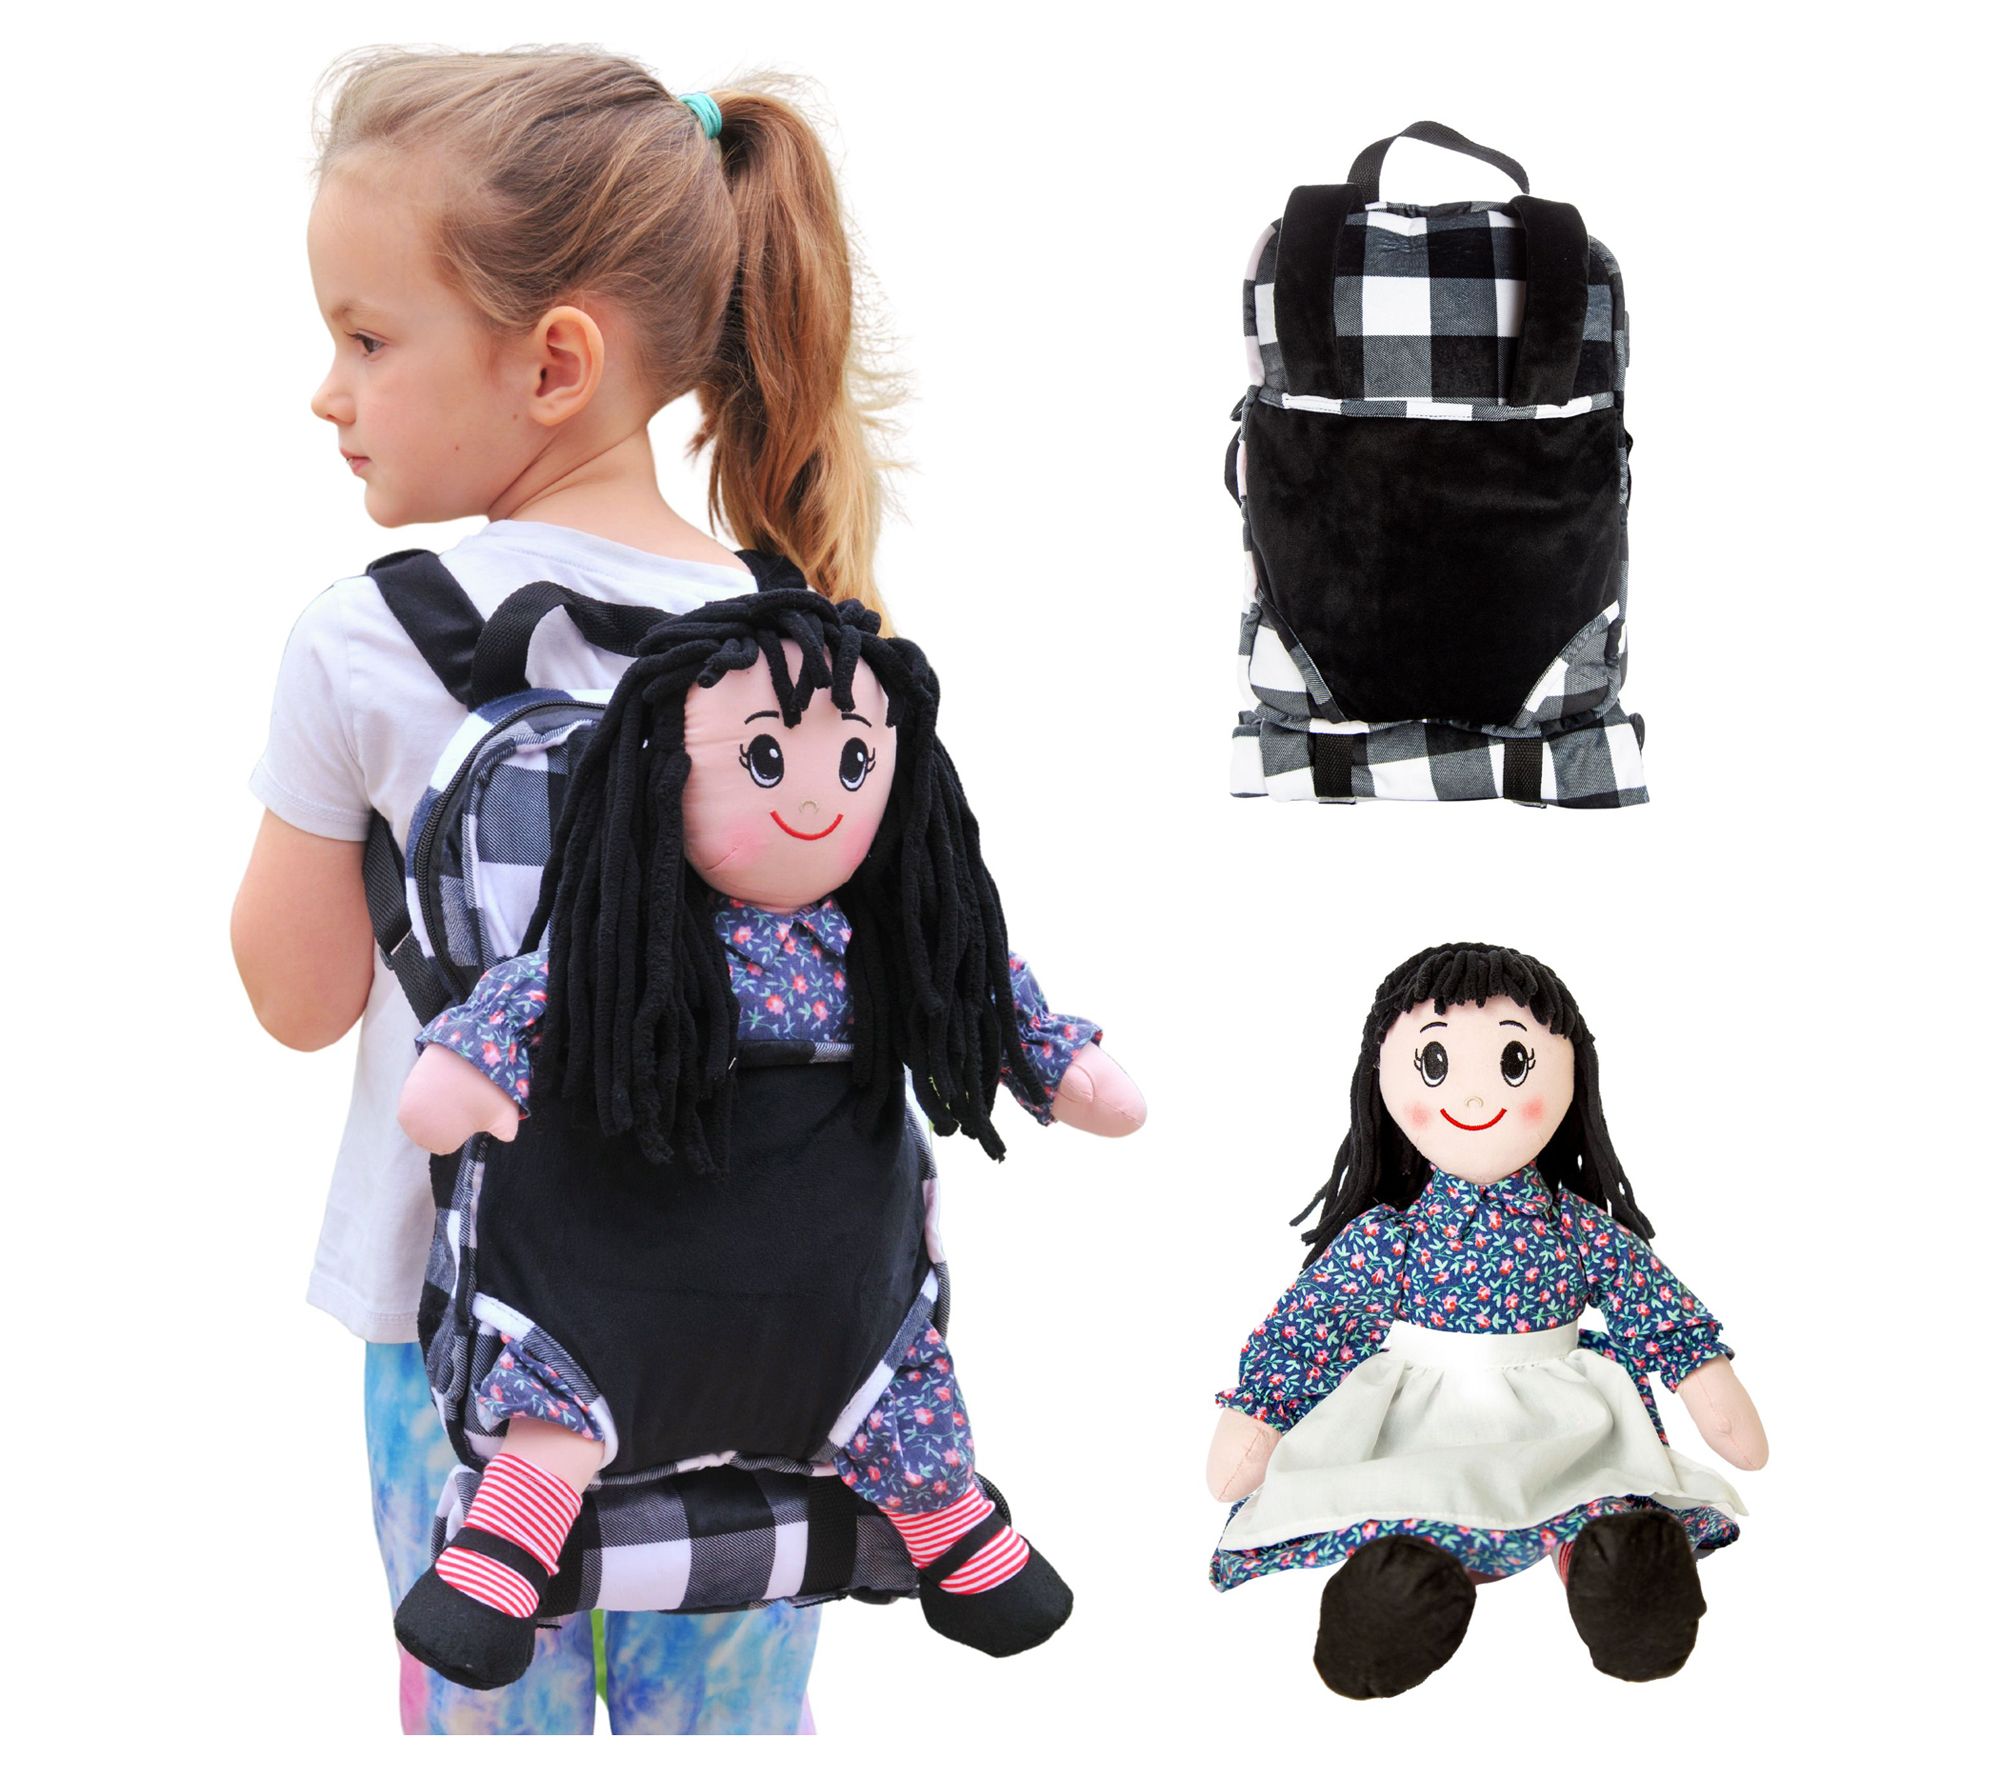 The Queen's Treasures 18 inch Doll 4 Piece Kitchen Maid Clothes Outfit